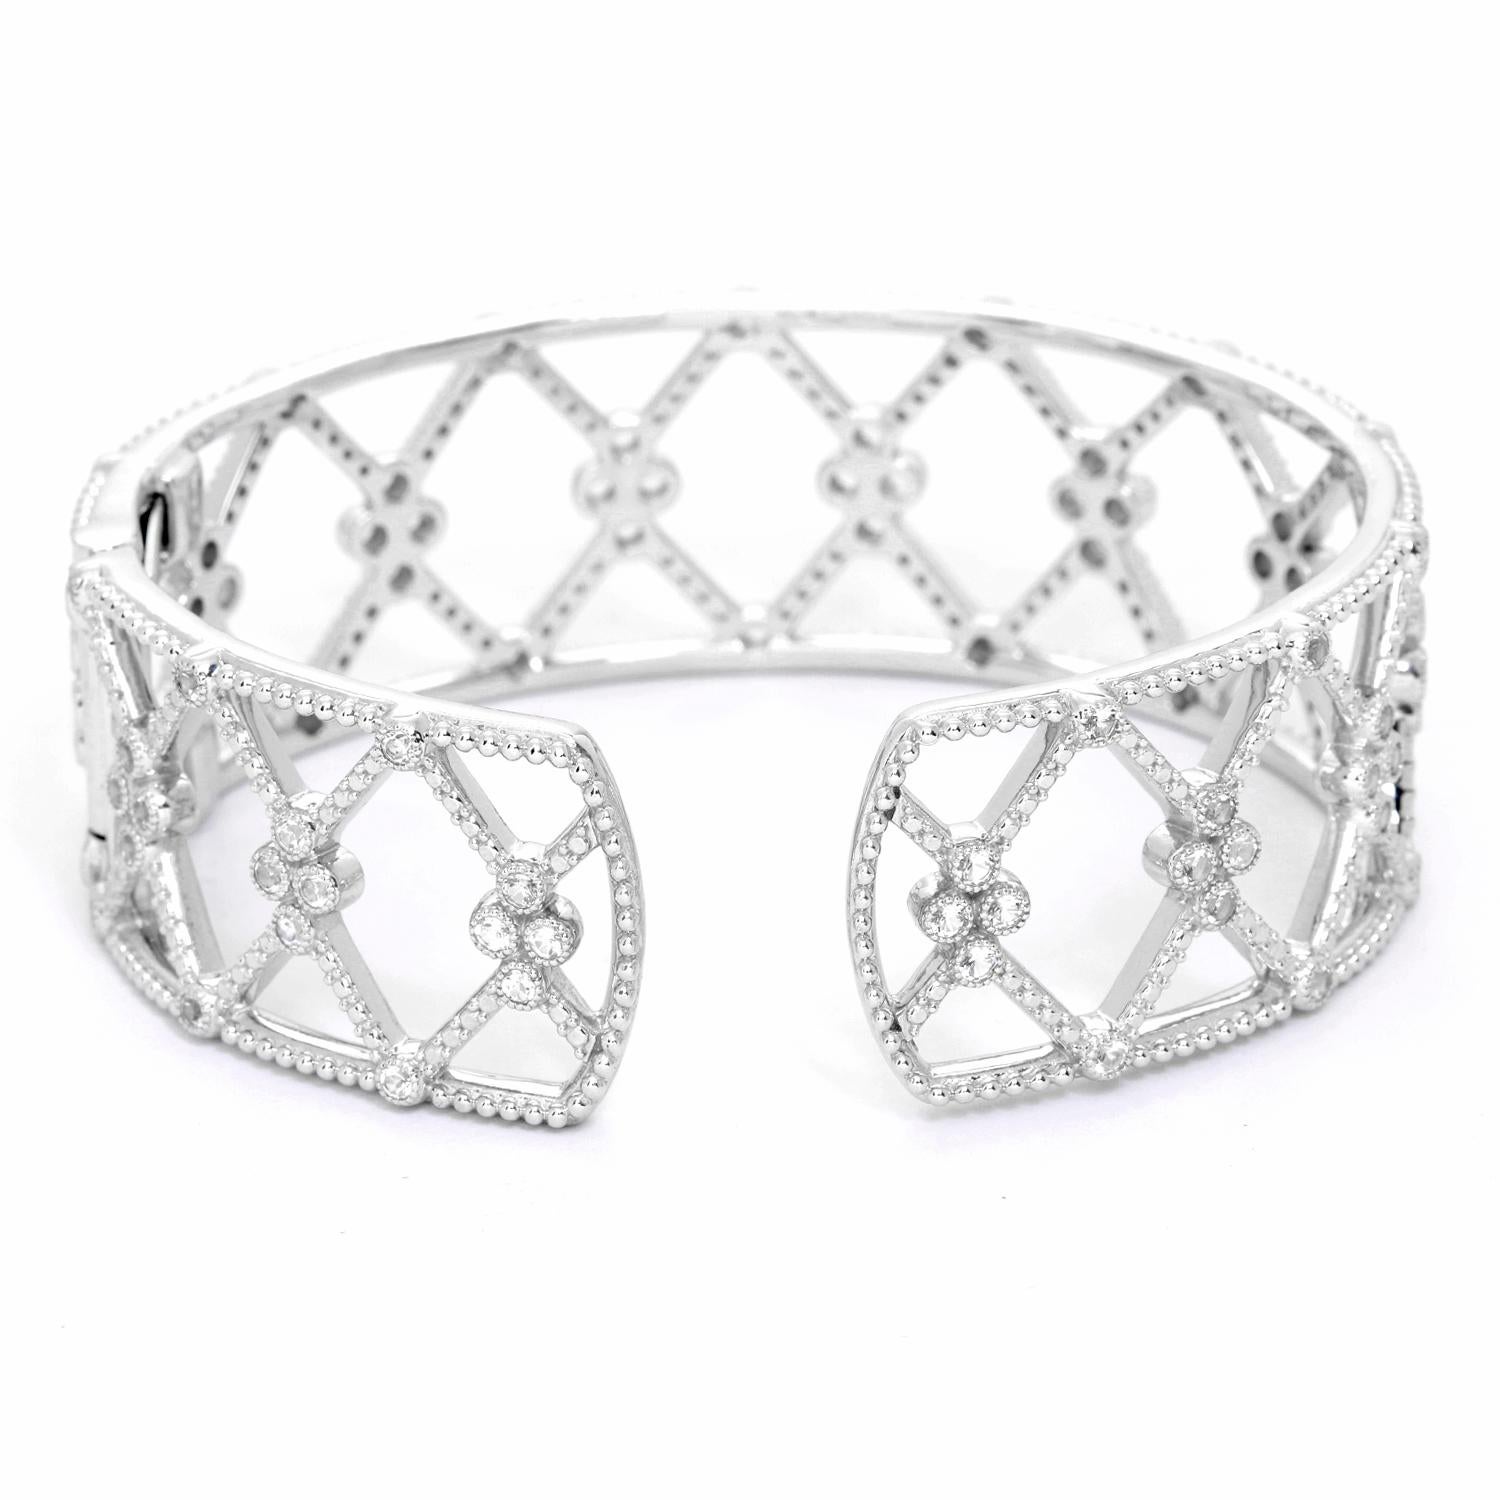 Jude Frances Silver and White Topaz Cuff - . Unused Large open marquis with White Topaz gemstones arranged in Provence. Features round faceted white topaz pave set in sterling silver. Total width 20 mm.